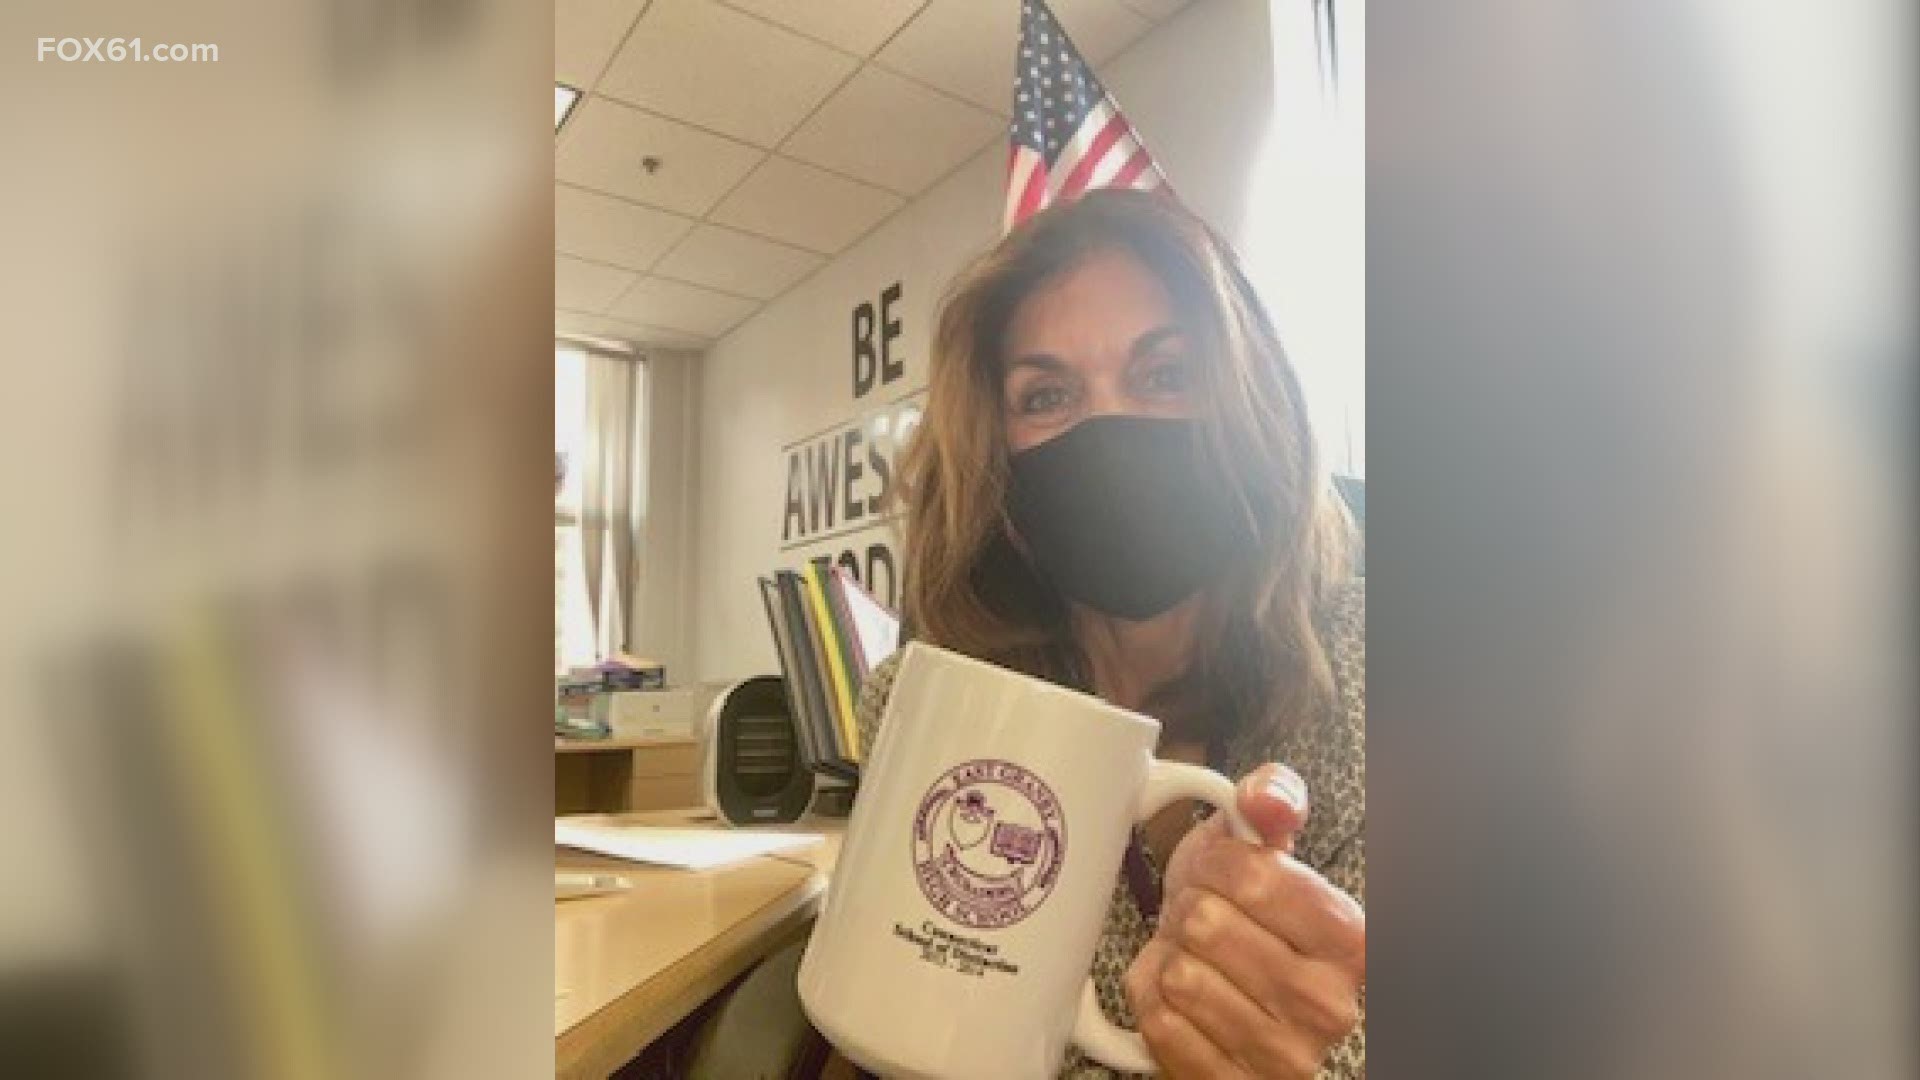 Send us a photo of your company's coffee cups by using #SHARE61 or email us at share61@fox61.com